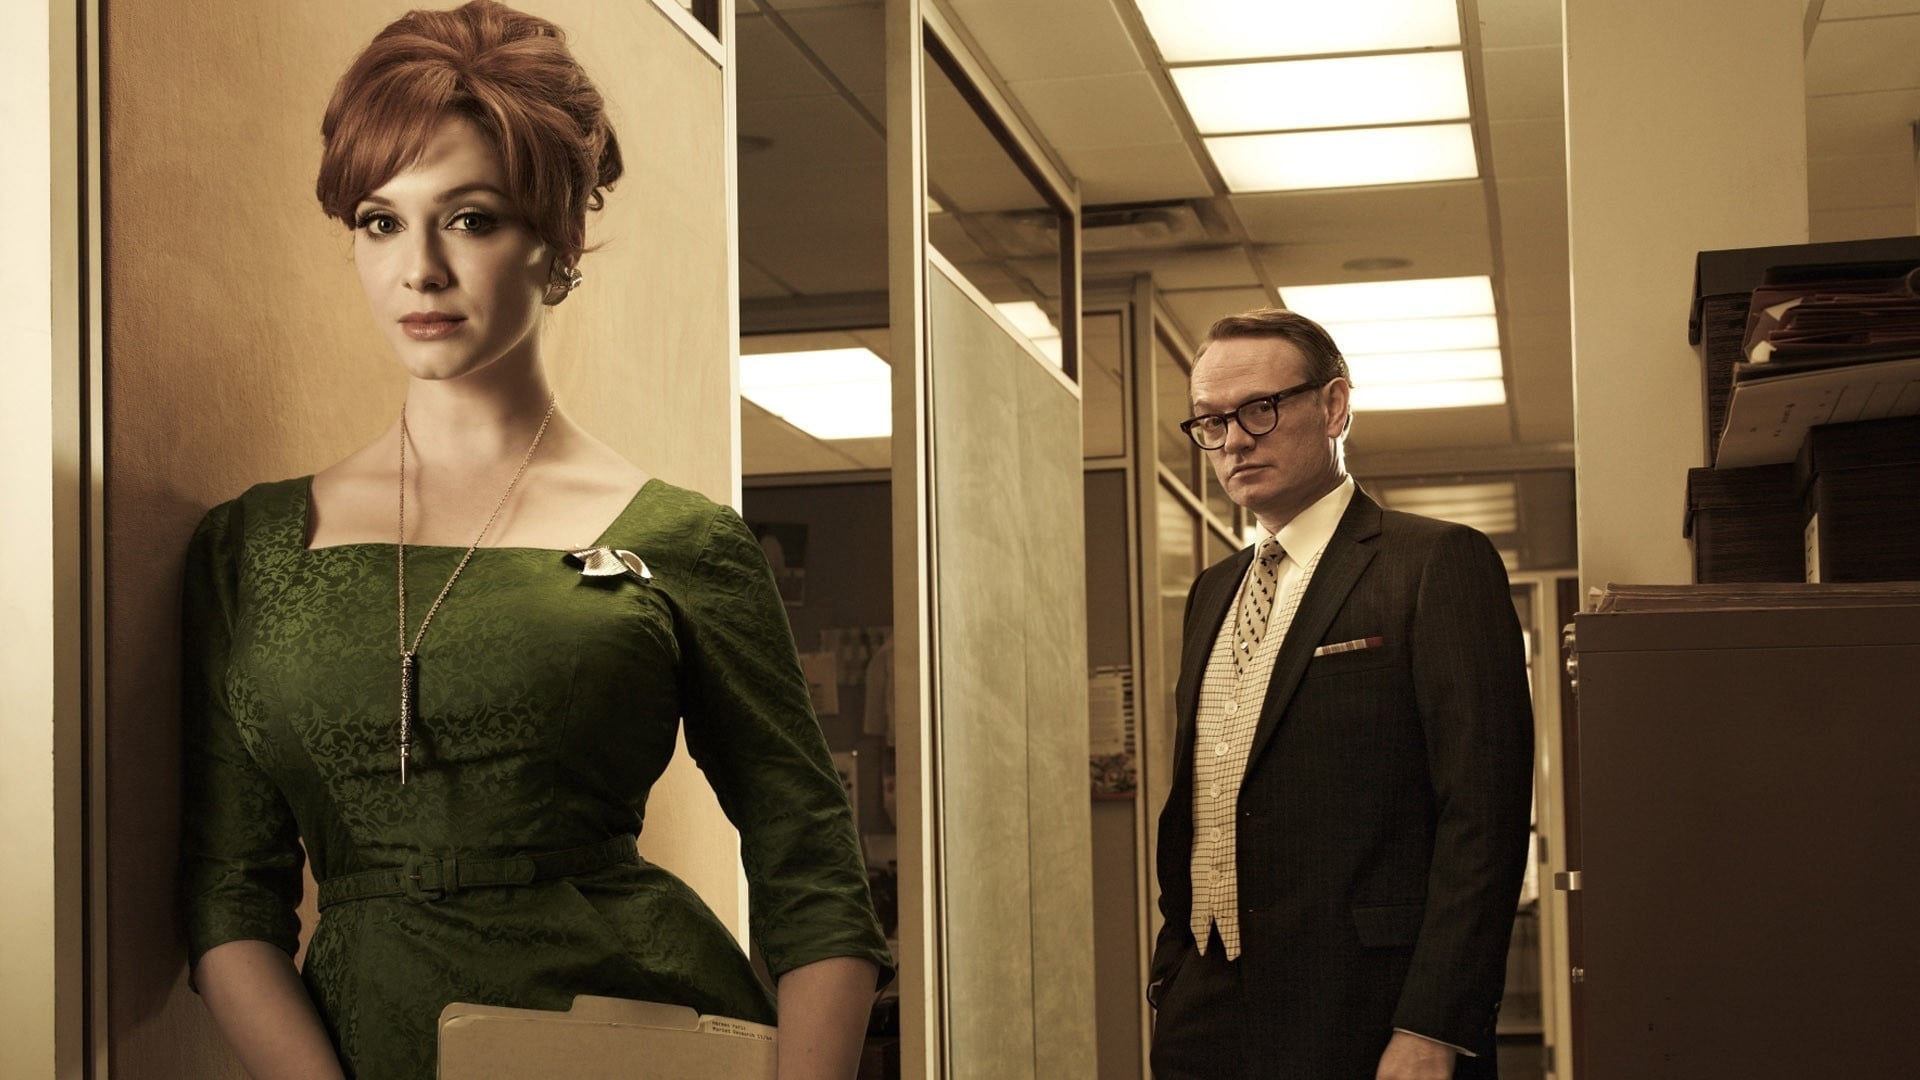 Mad Men (TV Series): Serial drama depicting parts of American society of the 1960s. 1920x1080 Full HD Background.